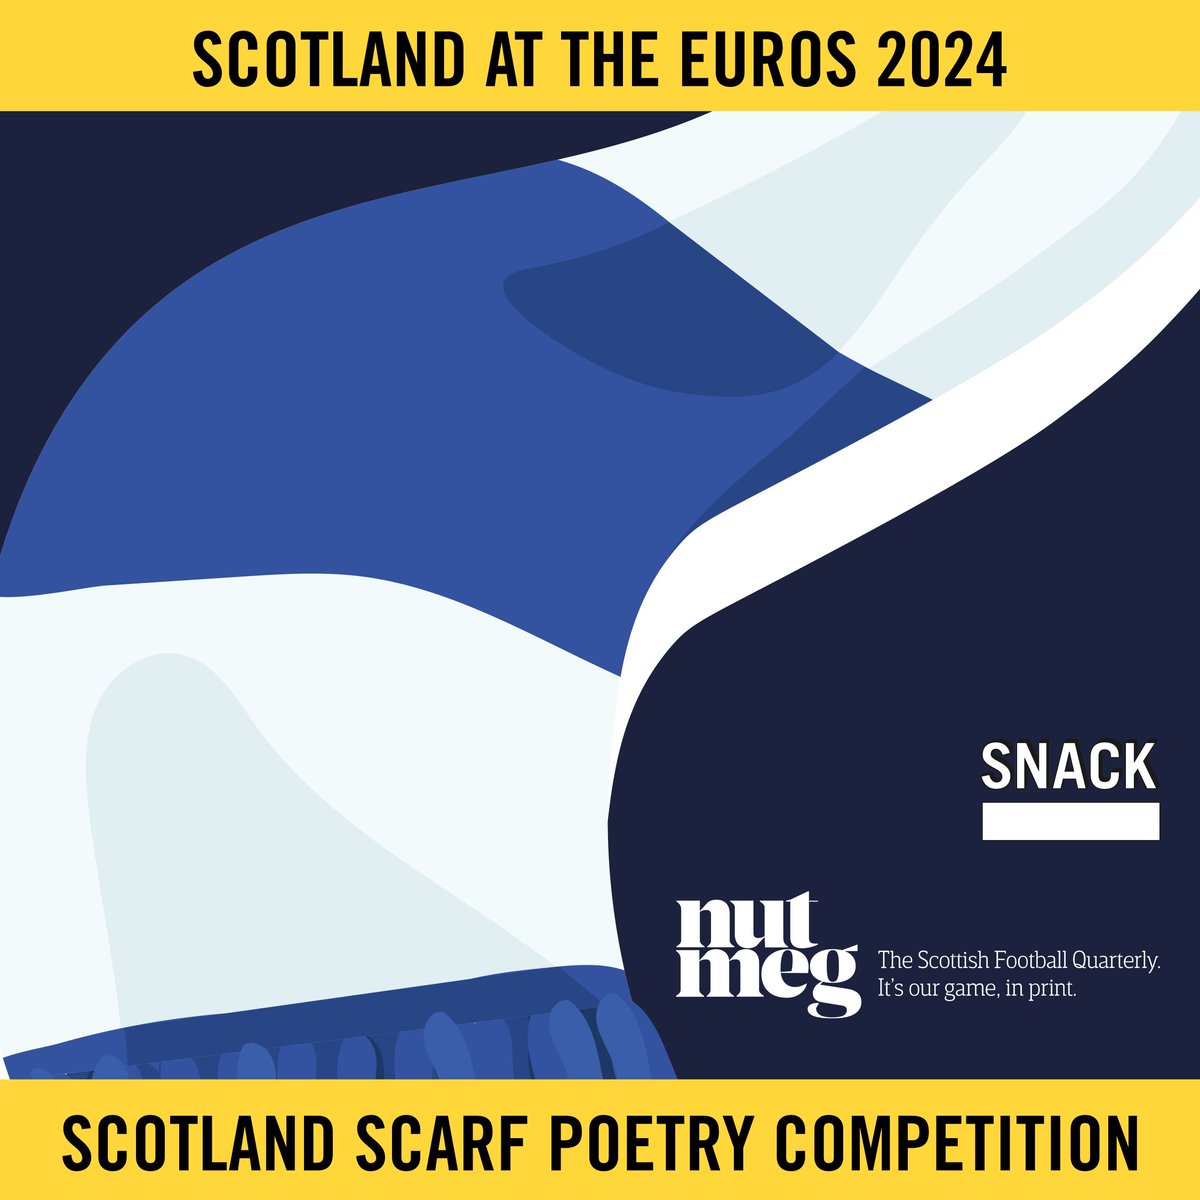 Poetry Guidelines 20 lines, maximum 10 words per line, maximum Submit at words@snackmag.co.uk by 15th April 2024 Full details at snackmag.co.uk/scotland-euros…